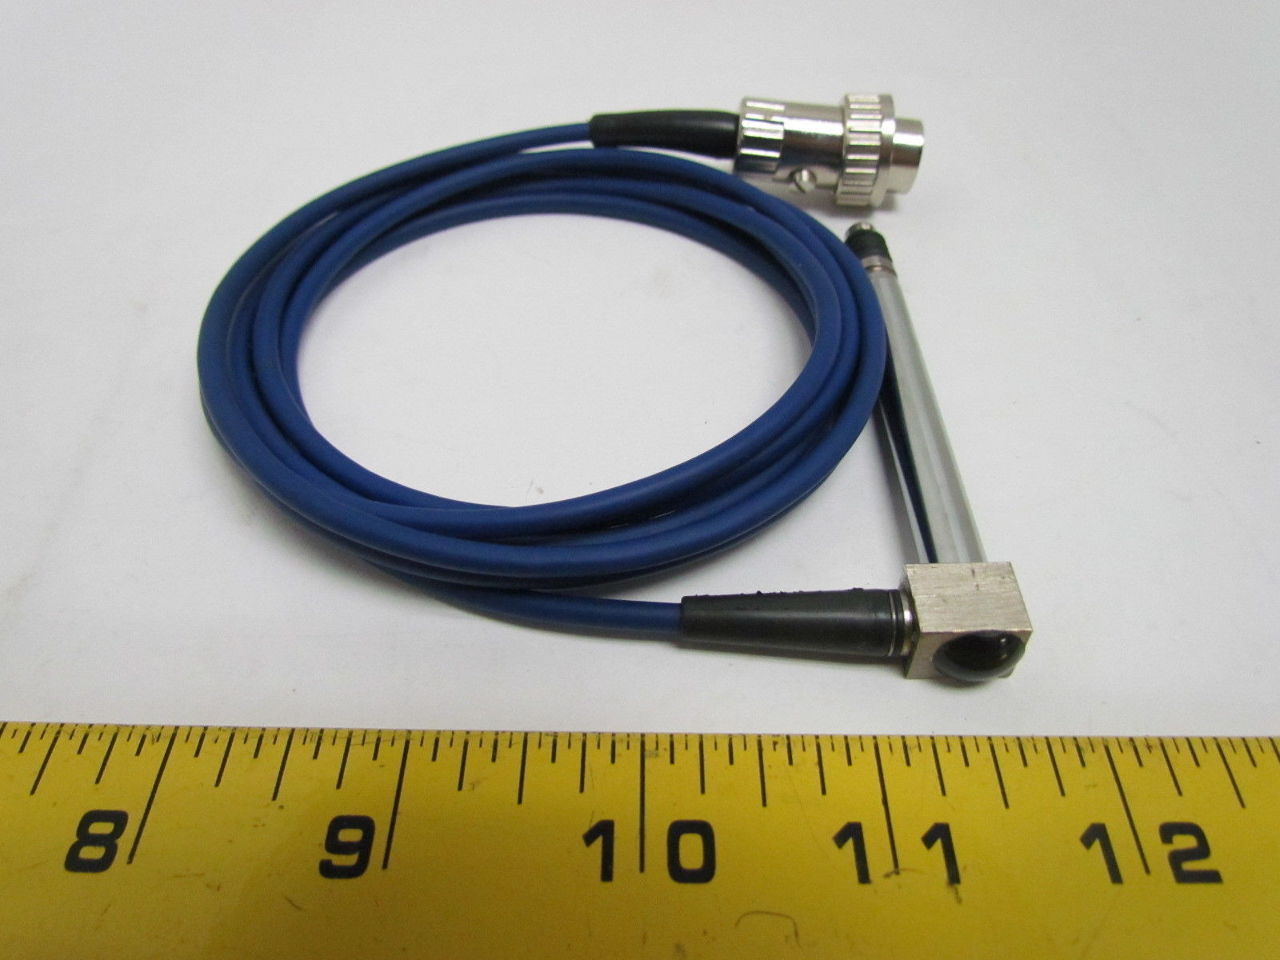 Micromatic 990-860-39 Linear Transducer Digital Gauging Probe Gauge DIAGNOSTIC ULTRASOUND MACHINES FOR SALE